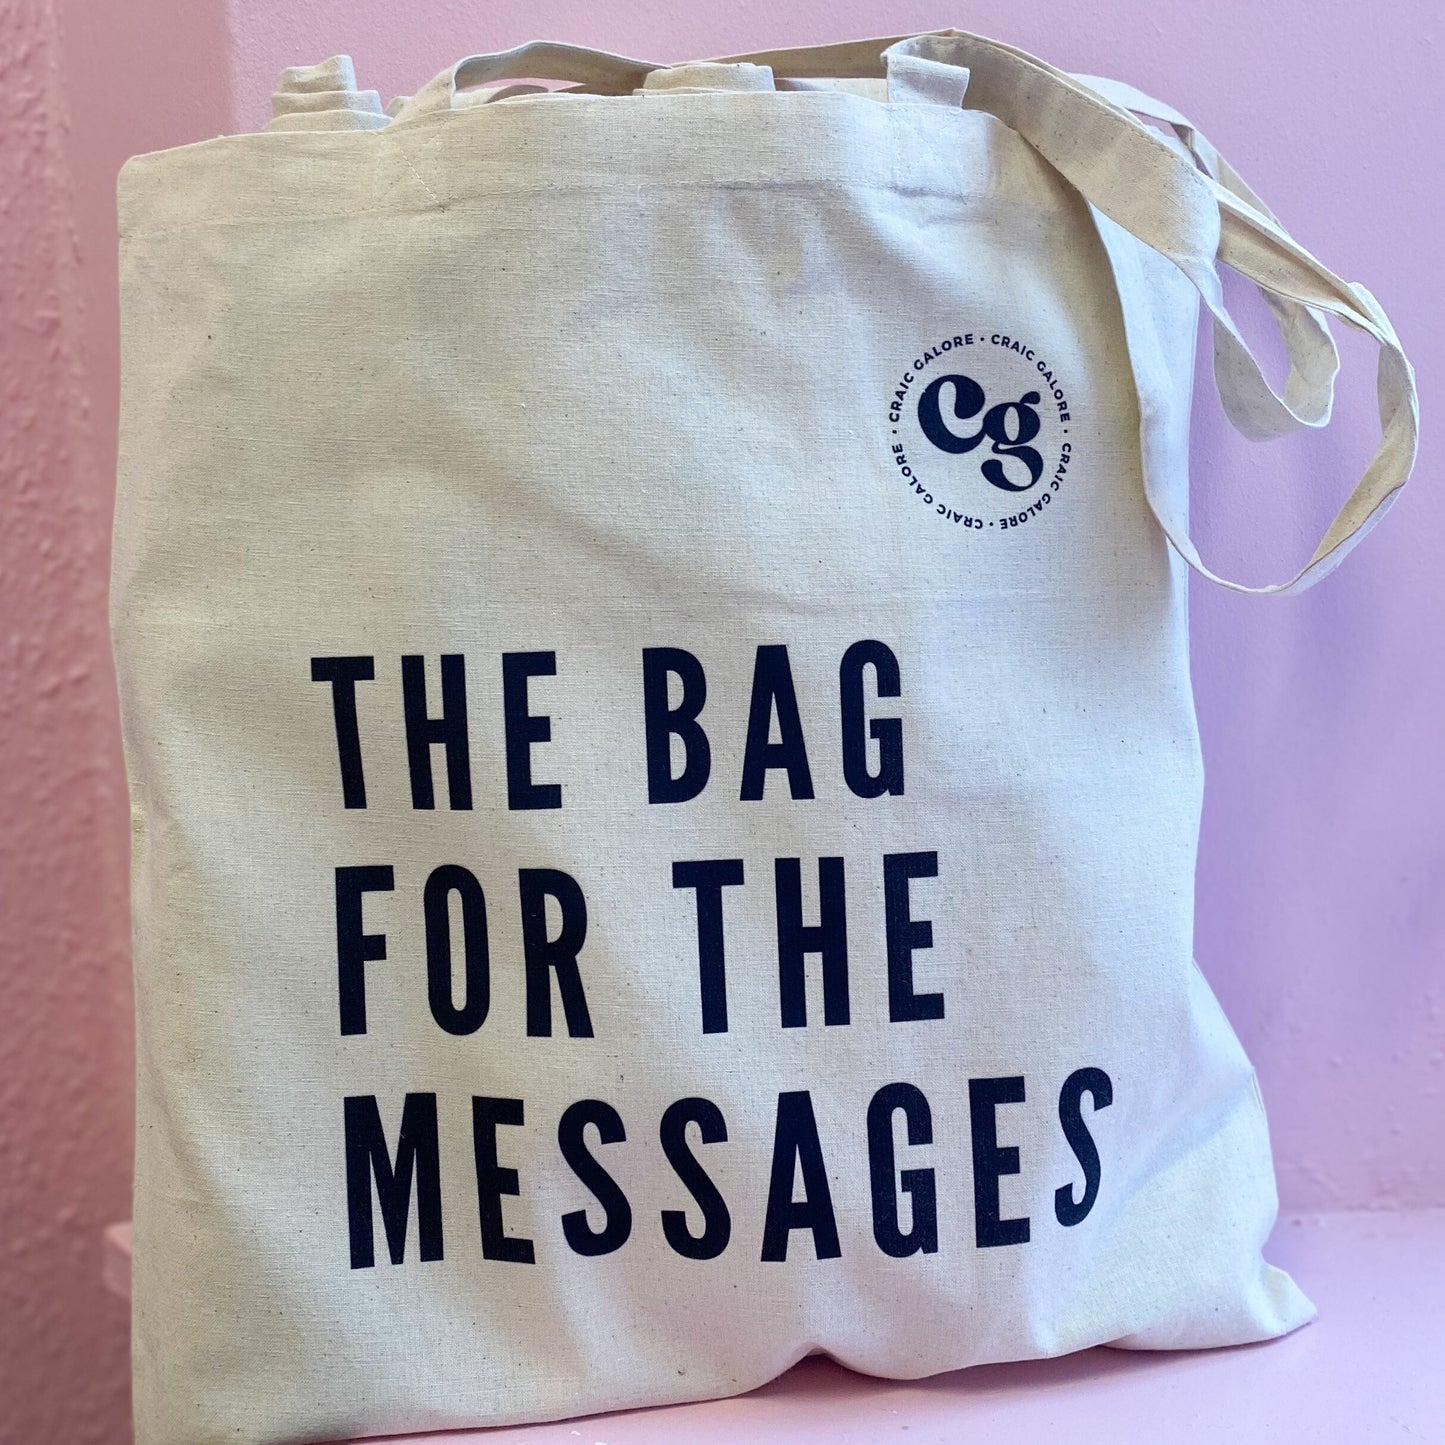 The bag for the messages